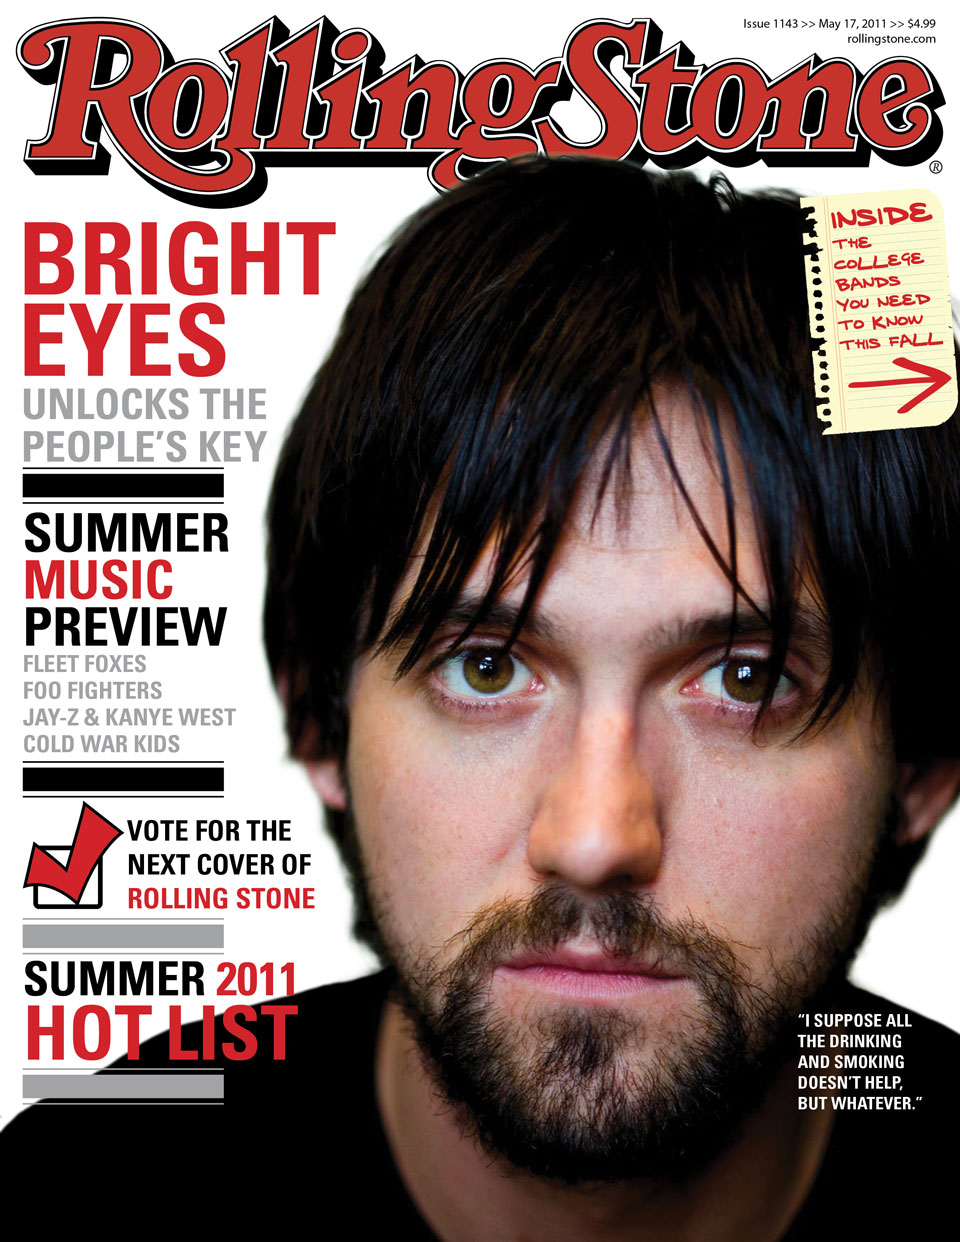 Mock Rolling Stone cover